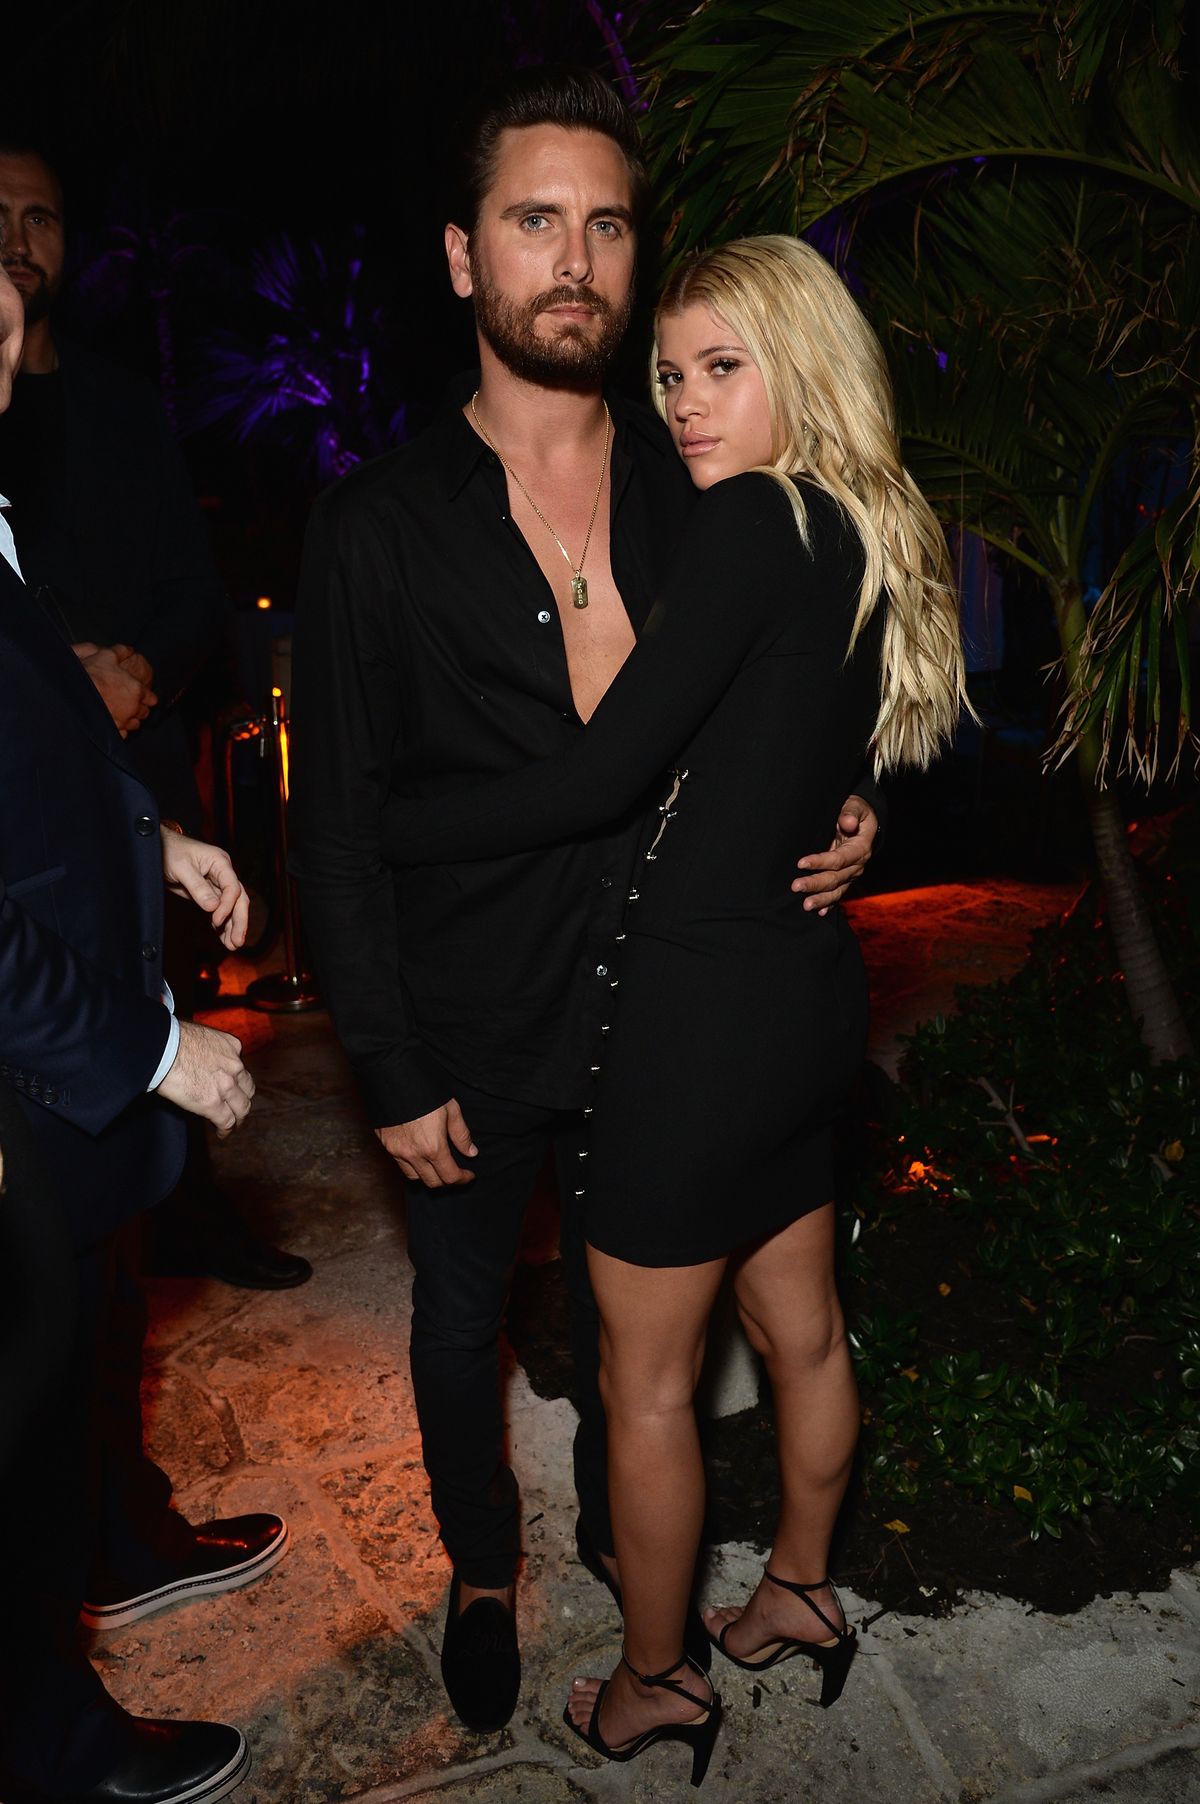 Sofia Richie Scott Disick Sexy Instagram - Sofia Richie Just Posted a  Suggestive Photo with Scott Disick on Her Hotel Room Bed